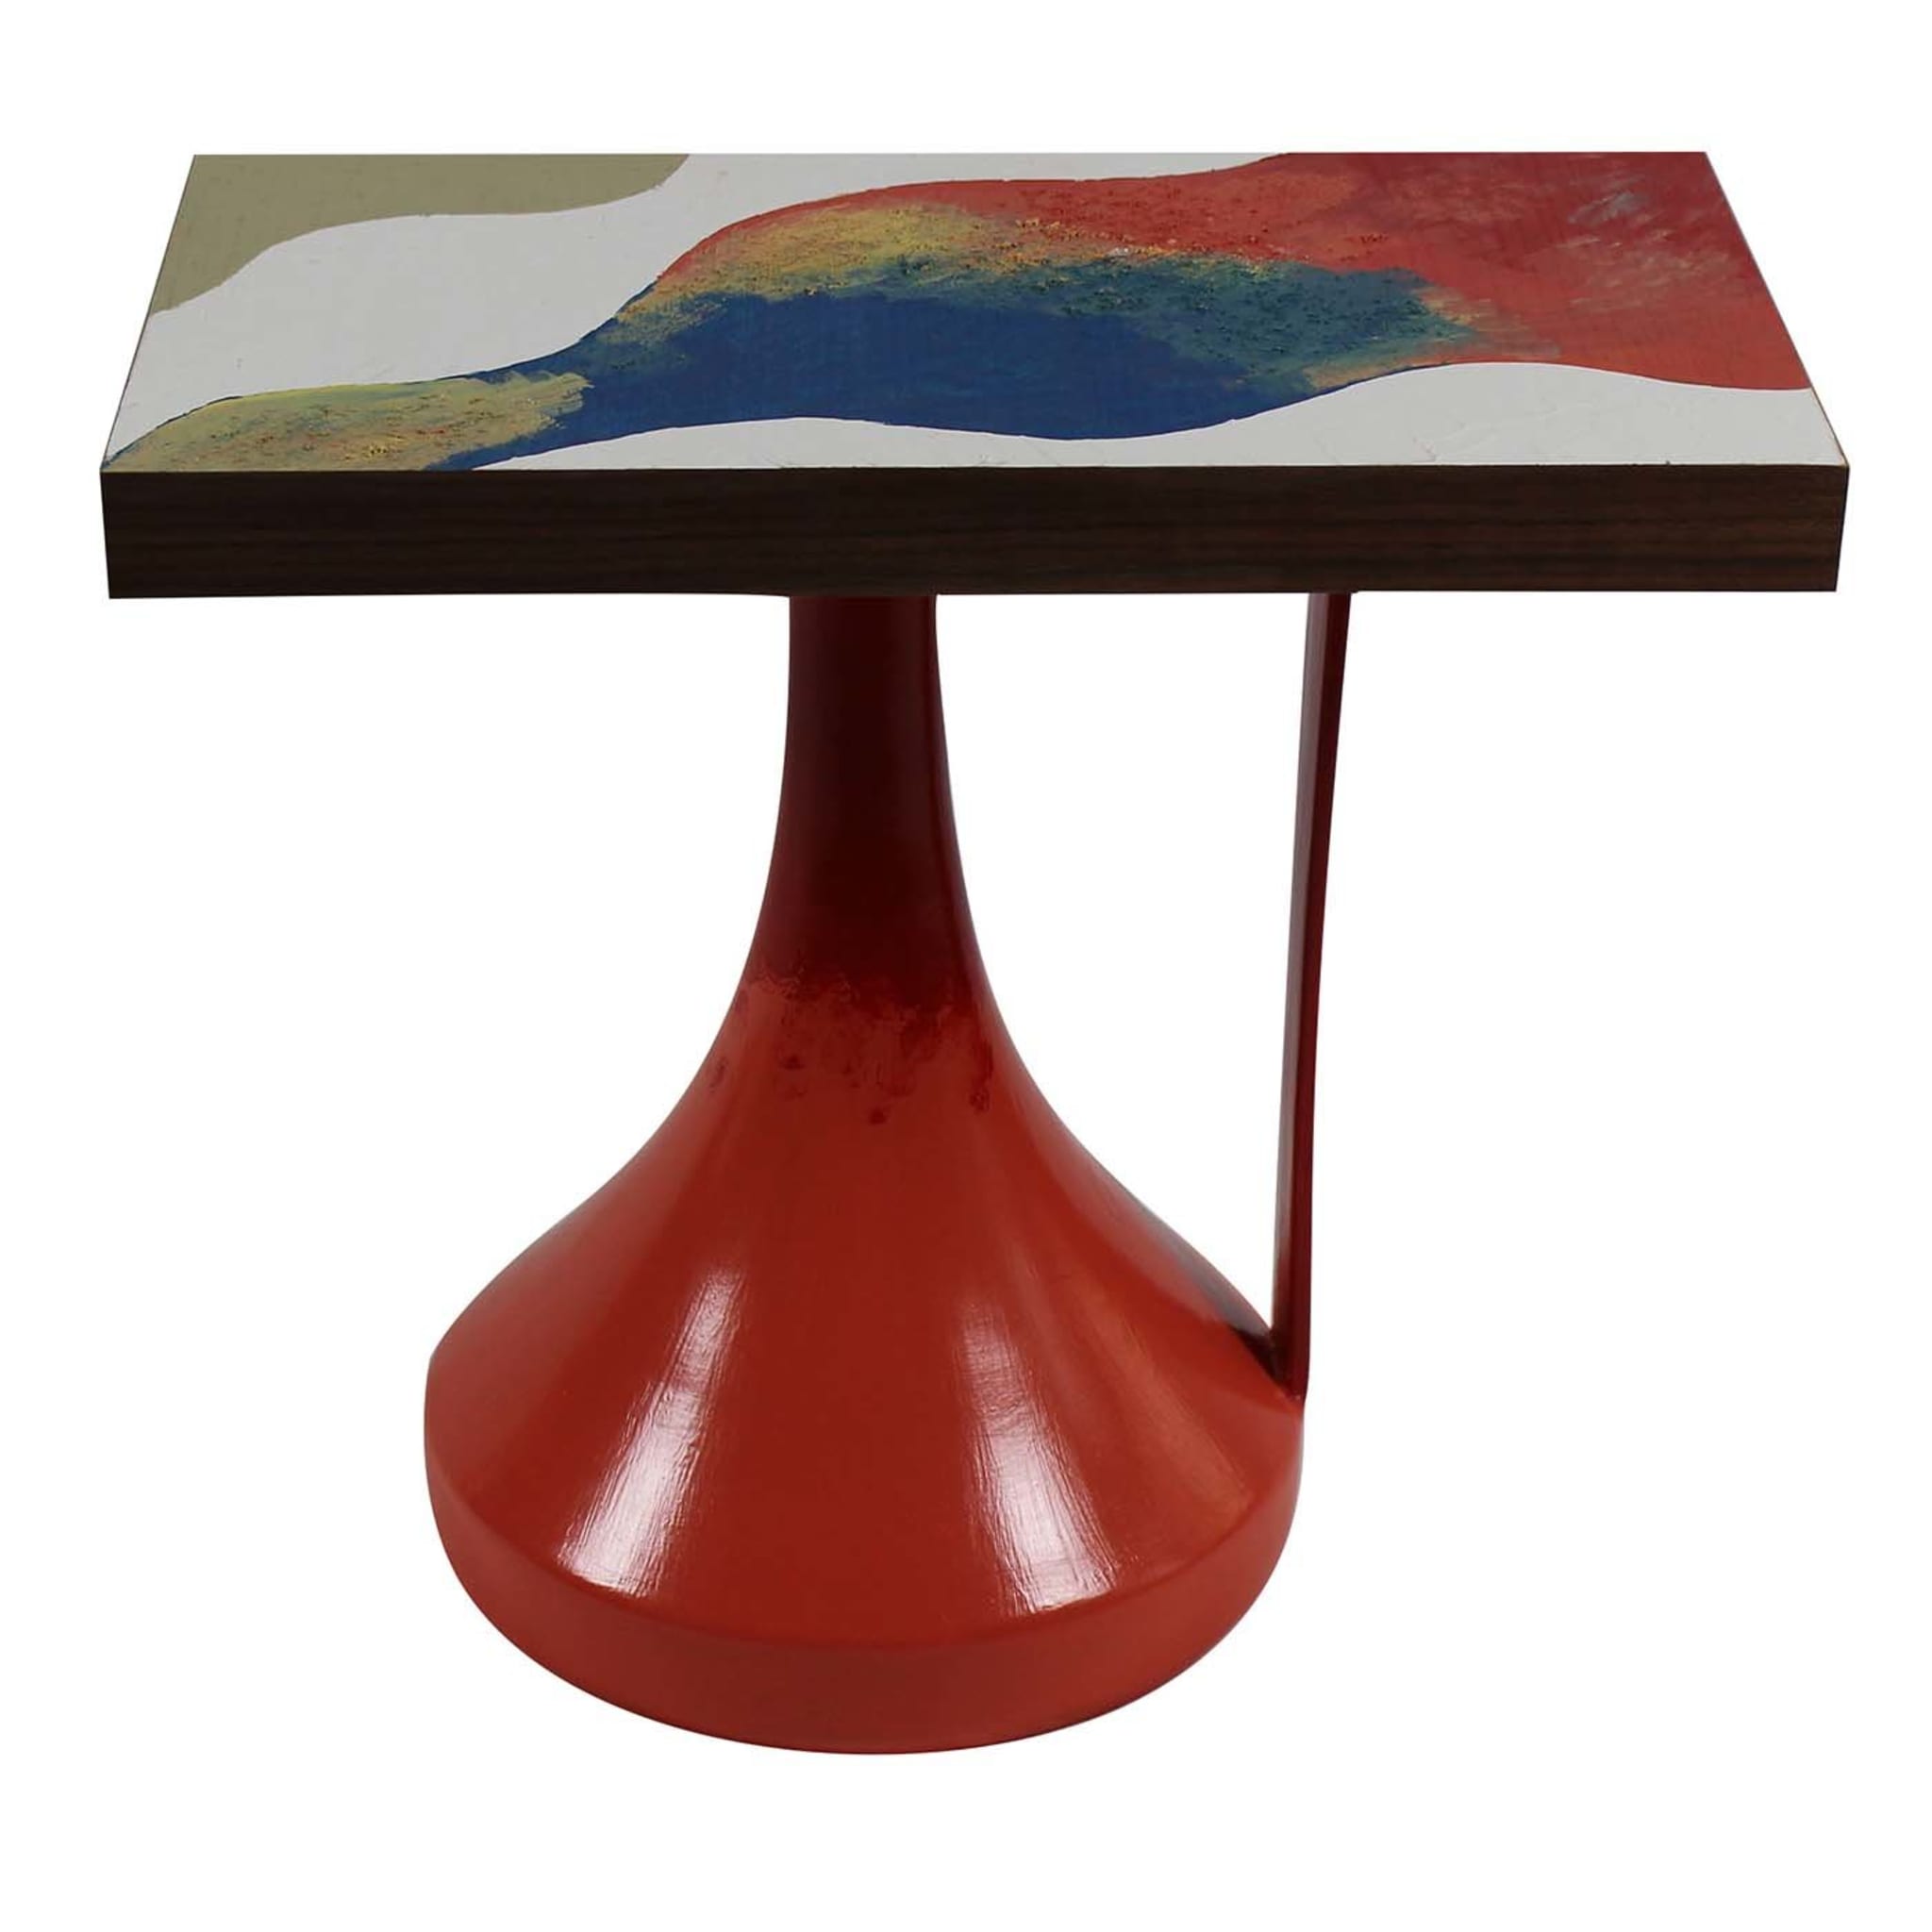 S1 Side Table by Mascia Meccani - Main view